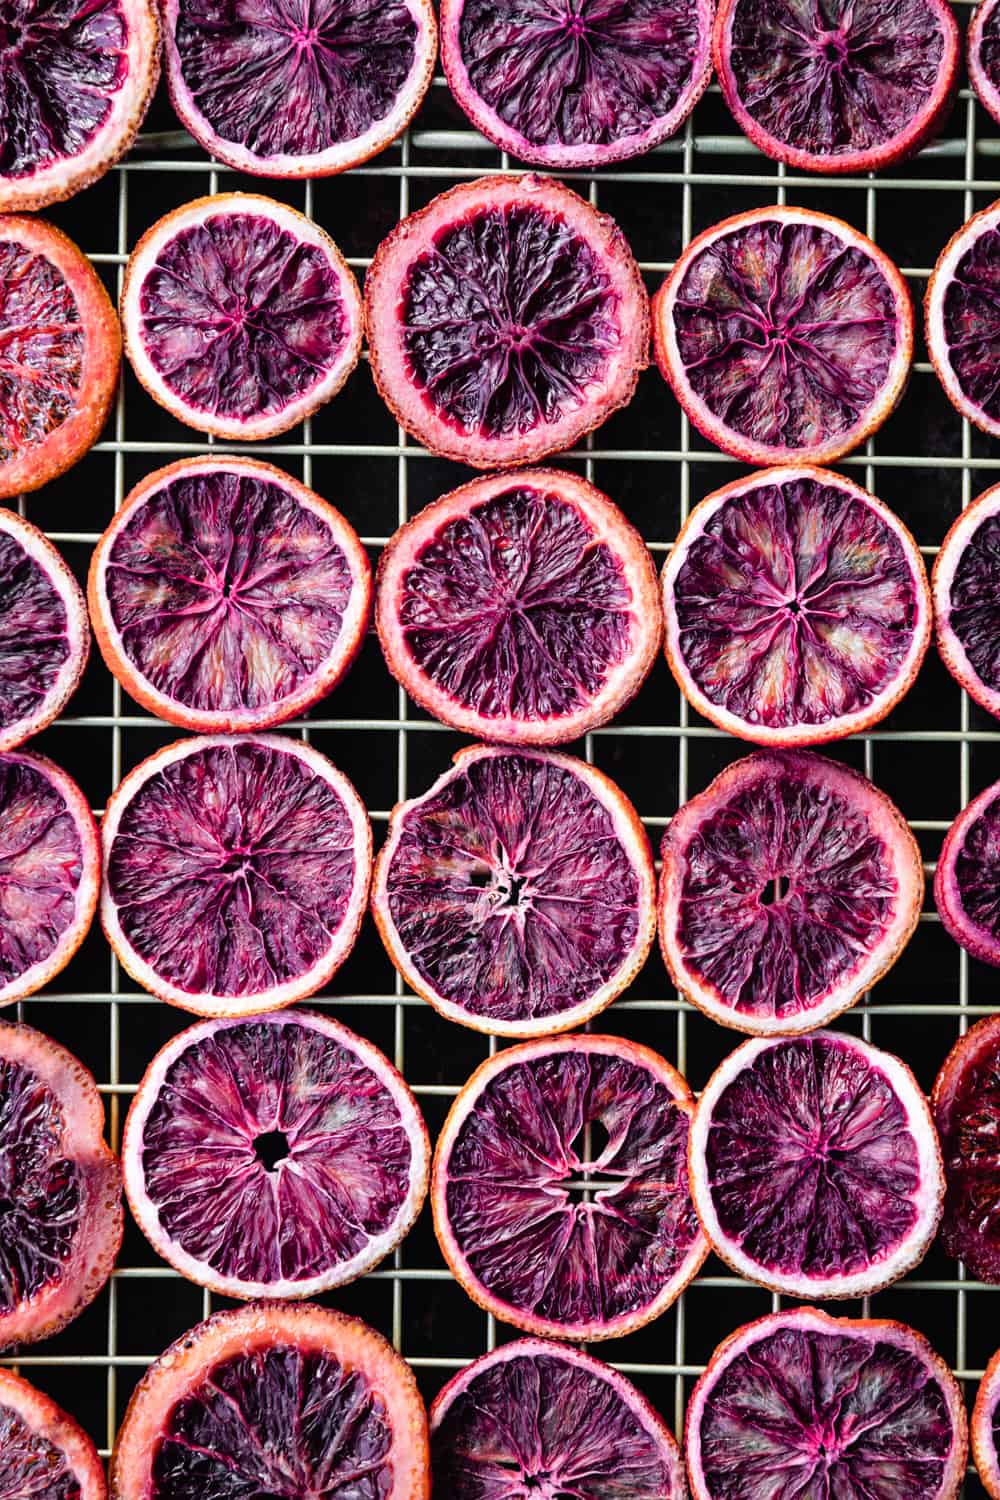 blood oranges slices drying on a gold wire rack